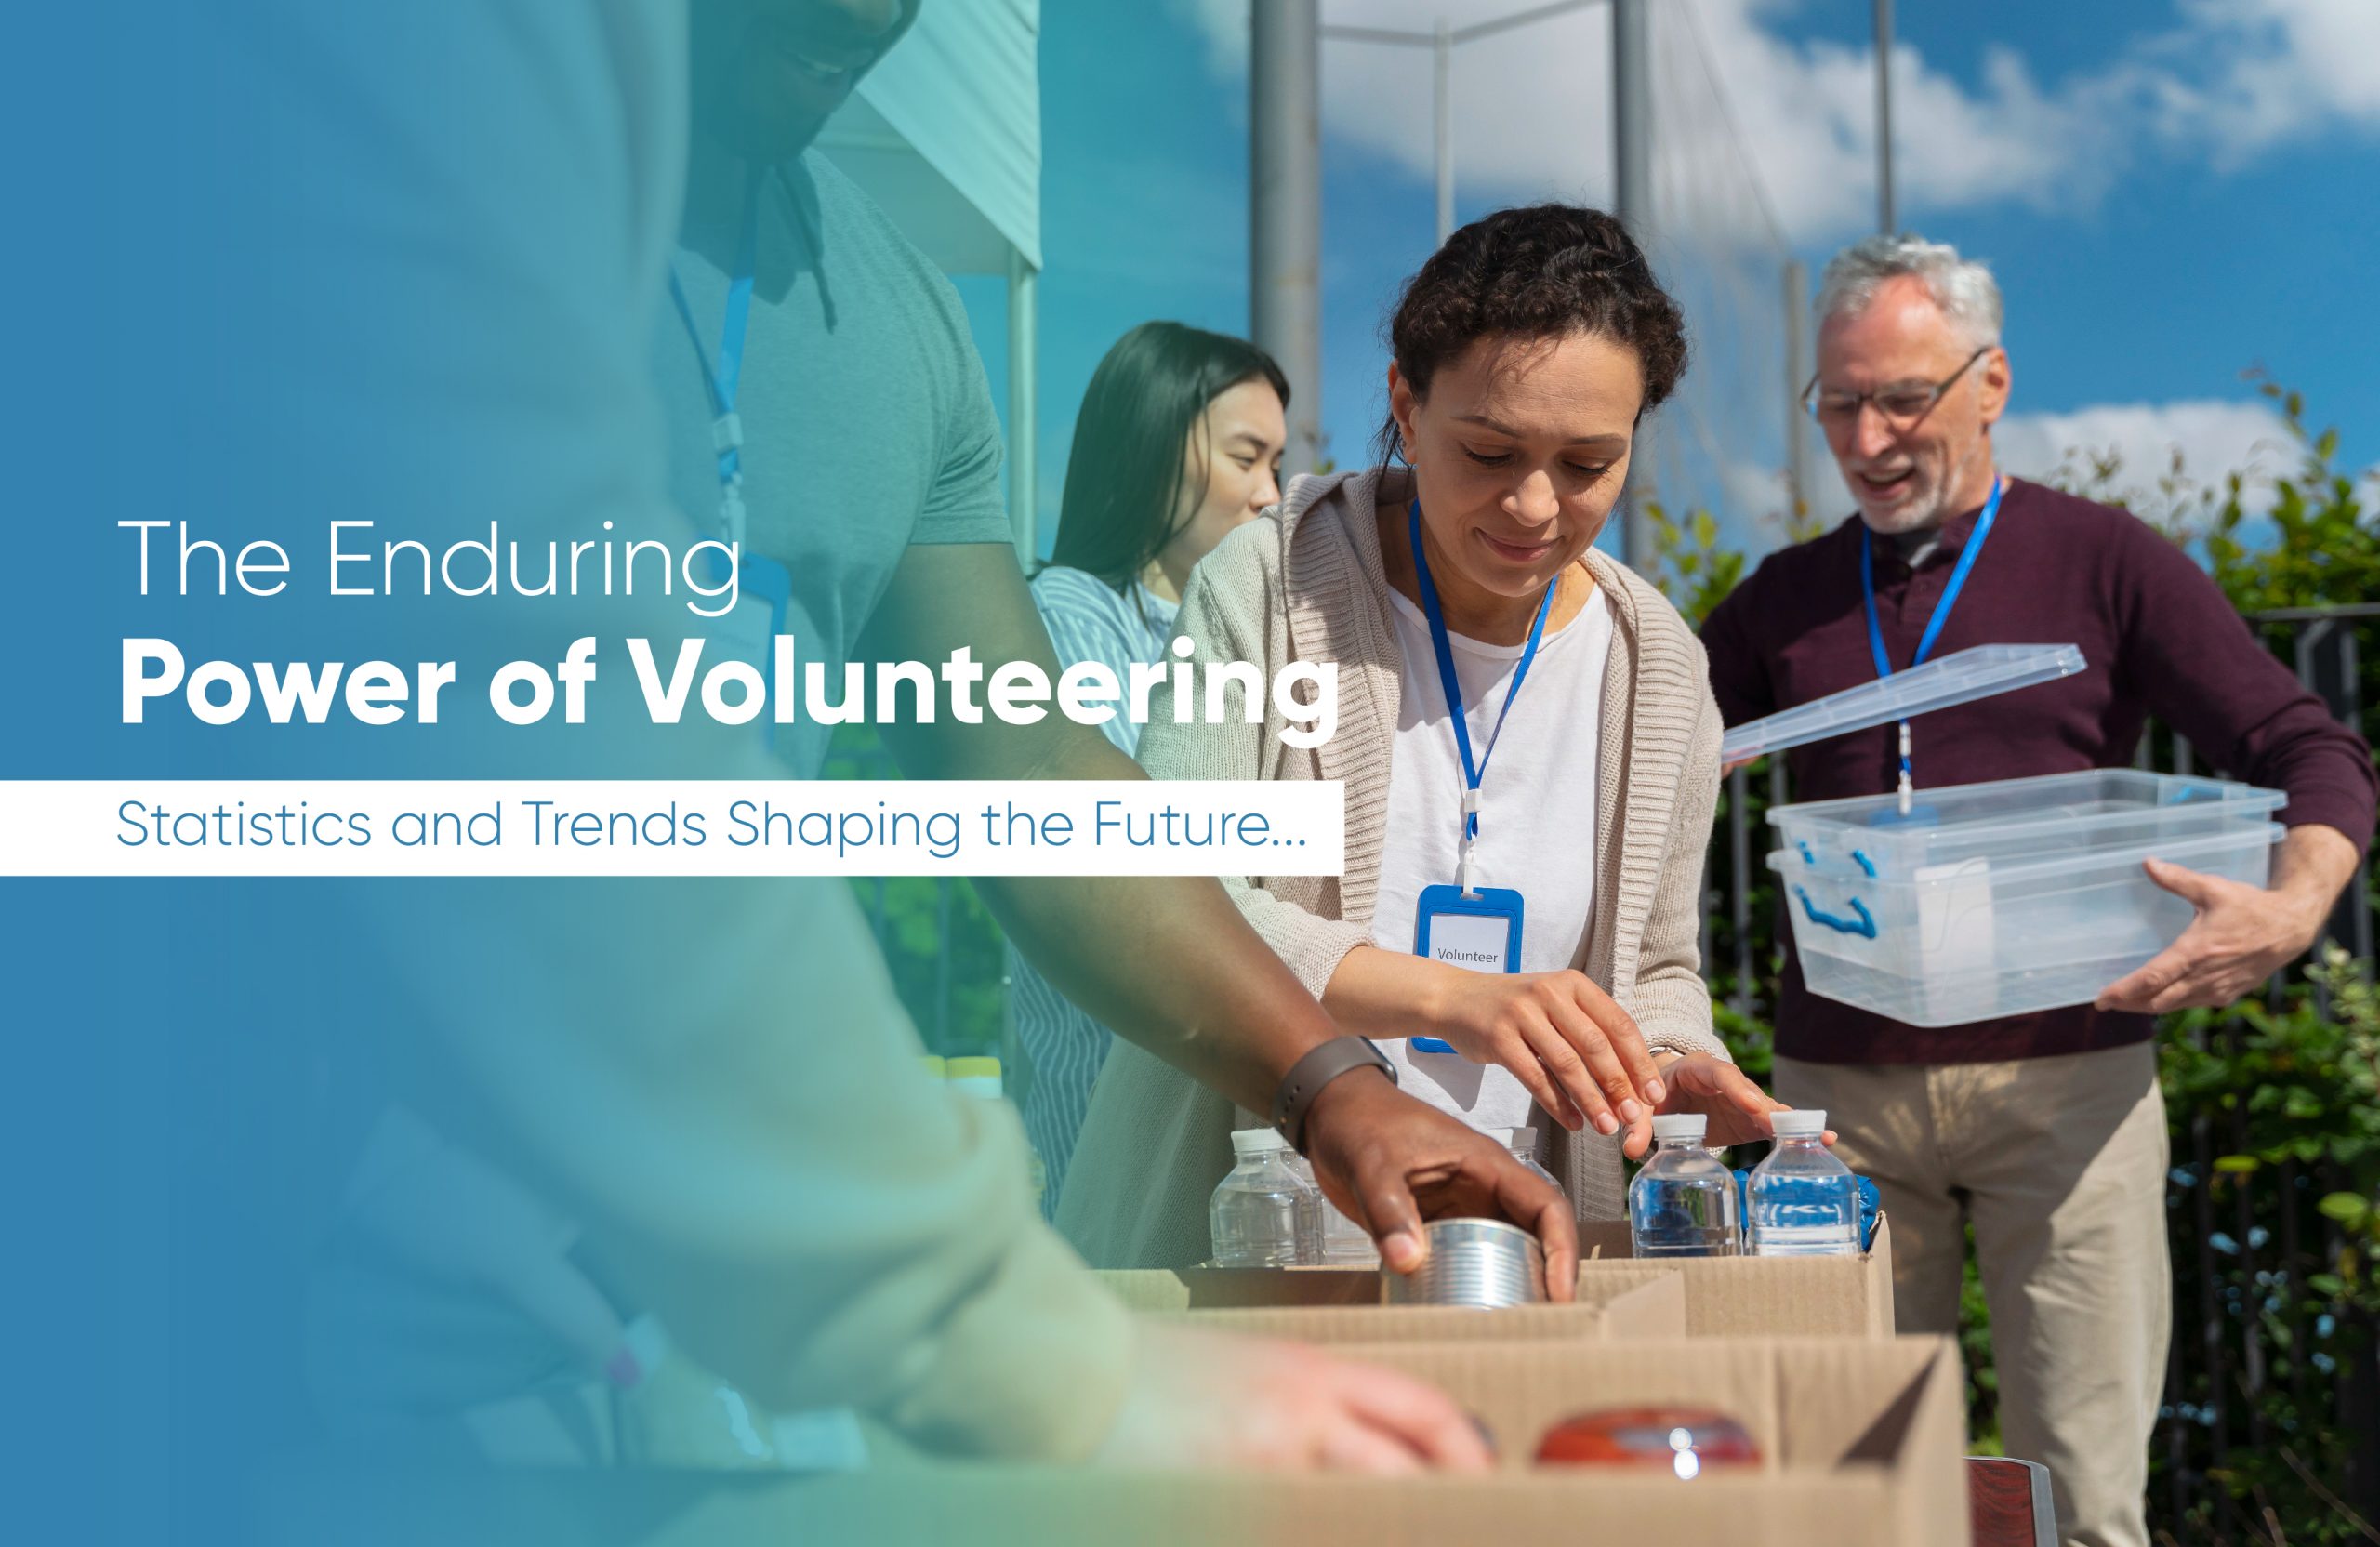 The Enduring Power of Volunteering: Statistics and Trends Shaping the Future